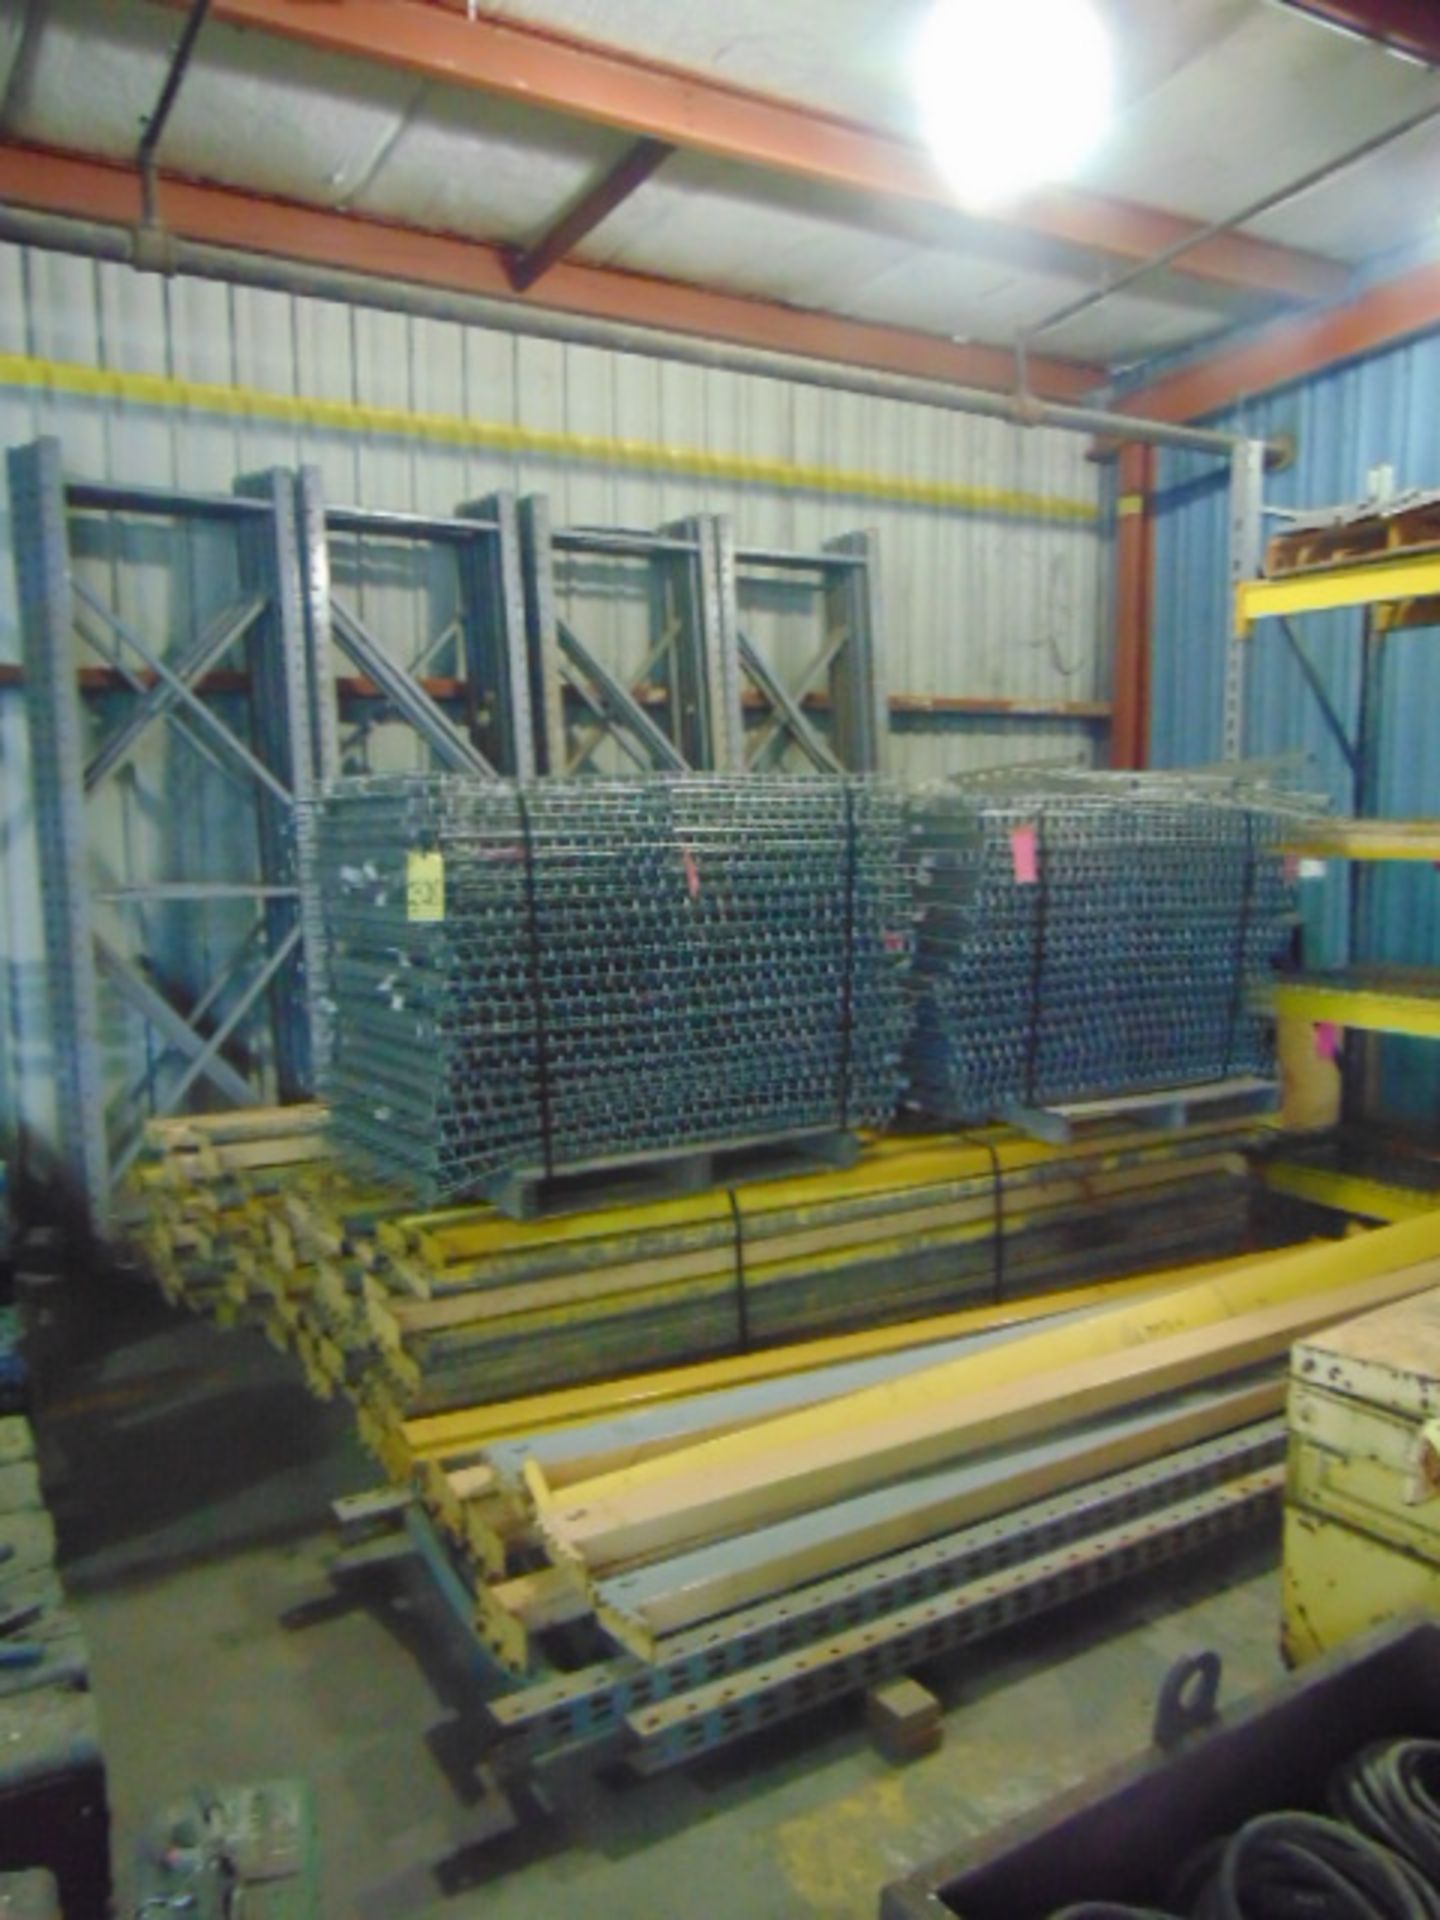 LOT OF PALLET RACK: (22) 10' x 3' uprights, approx.(80) 10' cross beams, wire mesh decking